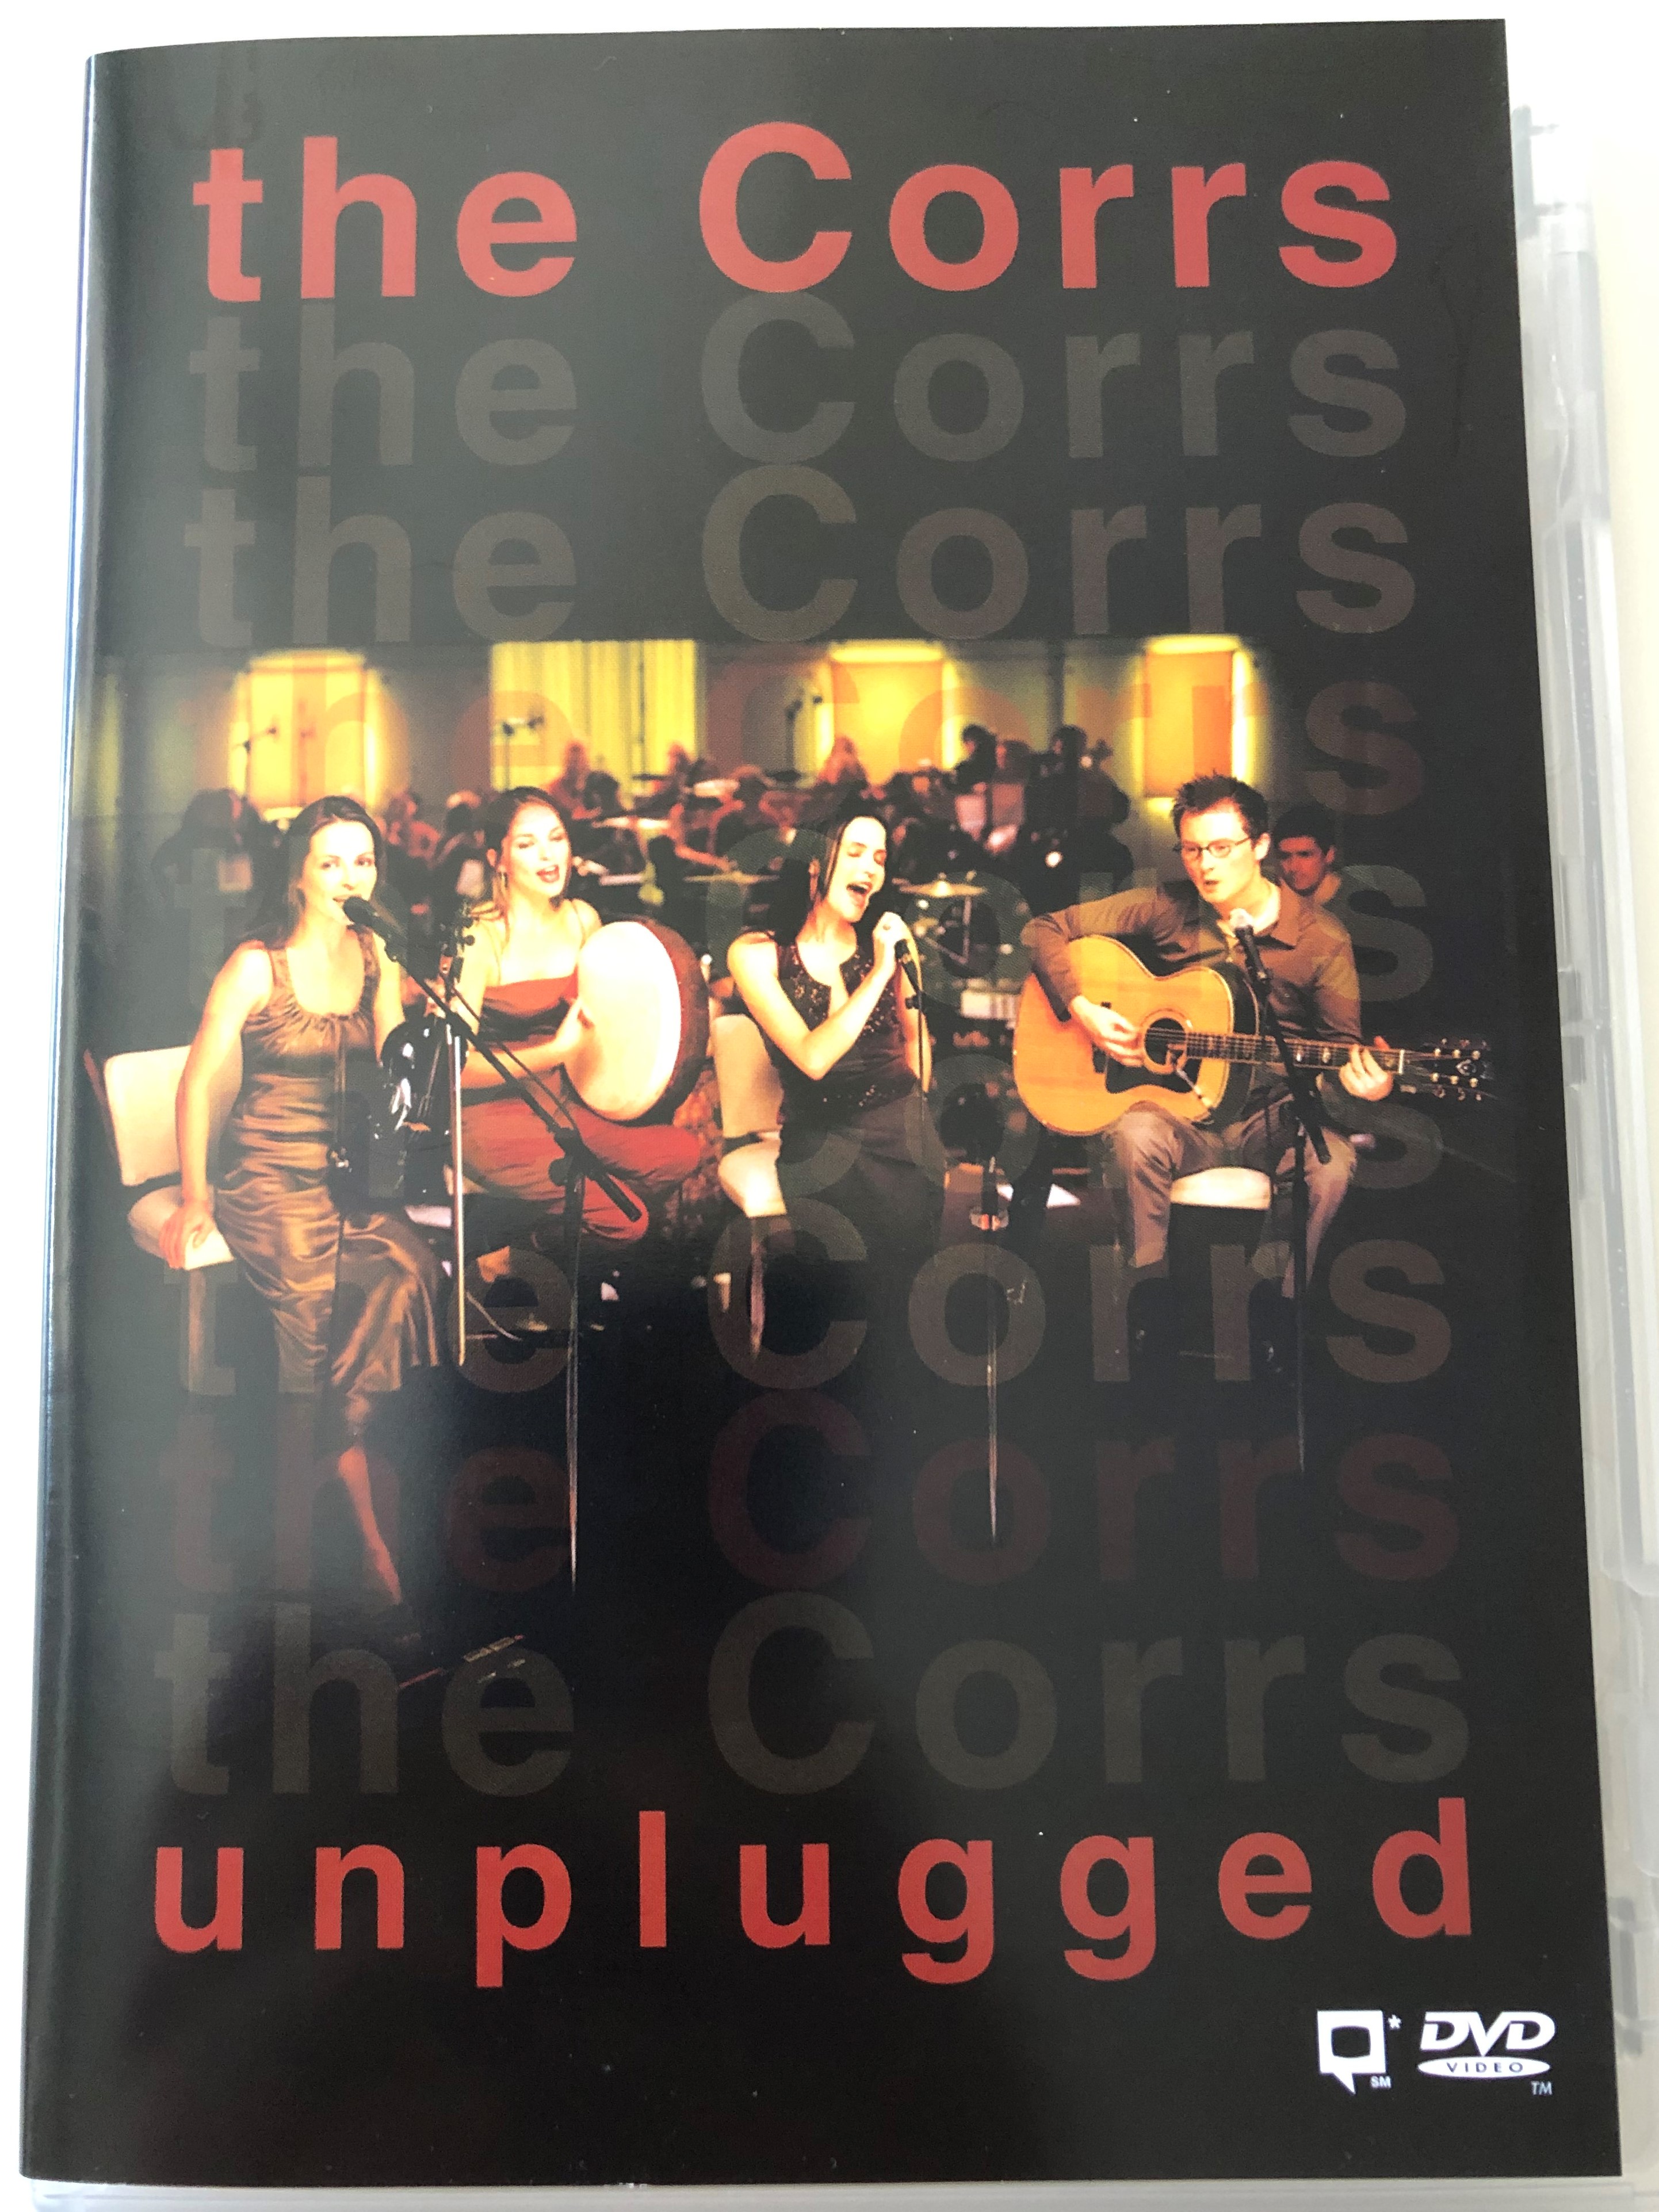 The Corrs unplugged DVD 1999 / Only when I sleep, What can I do, Forgiven  not forgotten, Old Town, So Young / Warner Music Vision - bibleinmylanguage